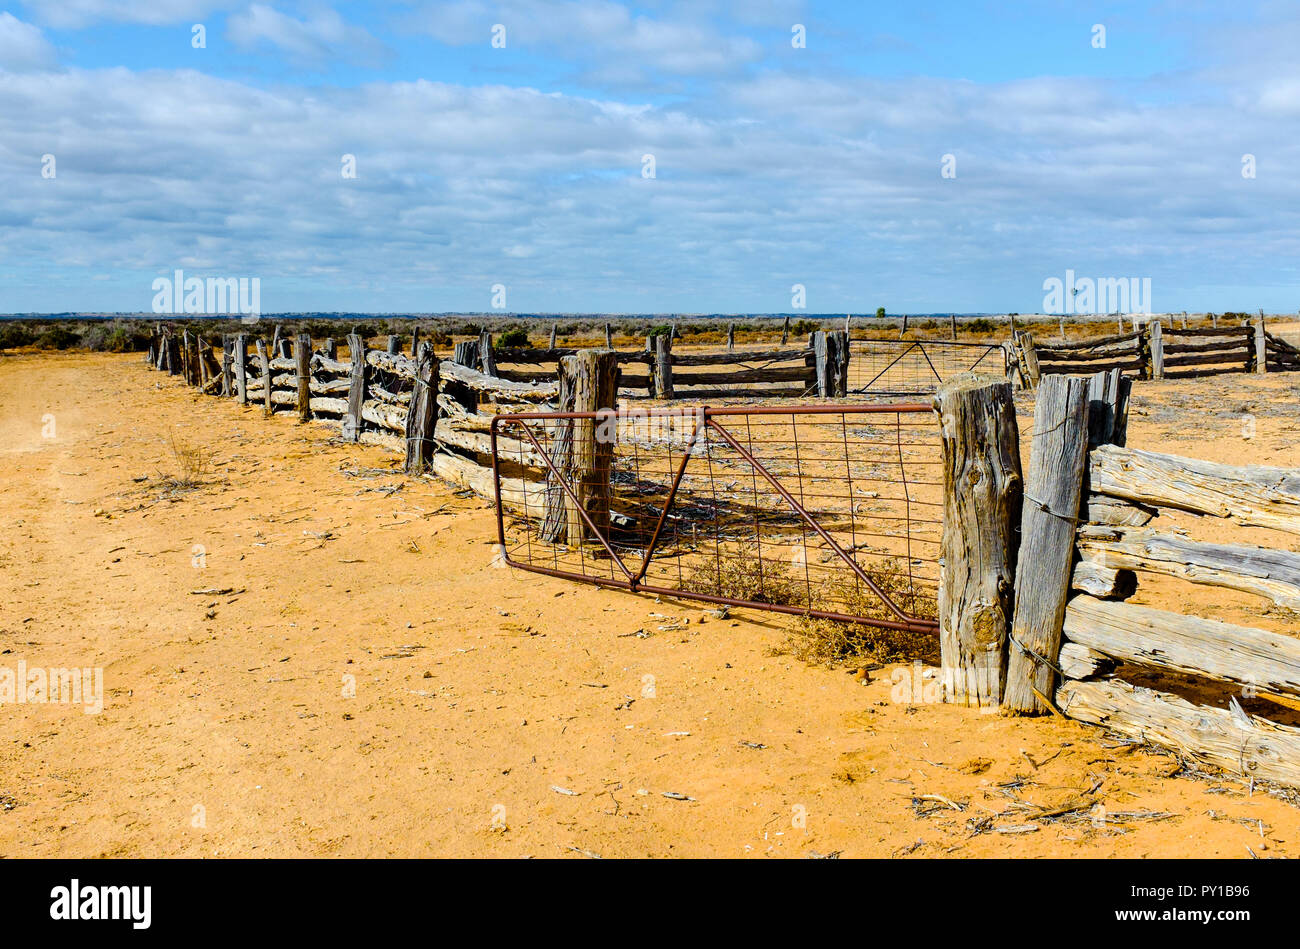 Old abandoned stockyards in Australian outback, New South Wales Australia Stock Photo